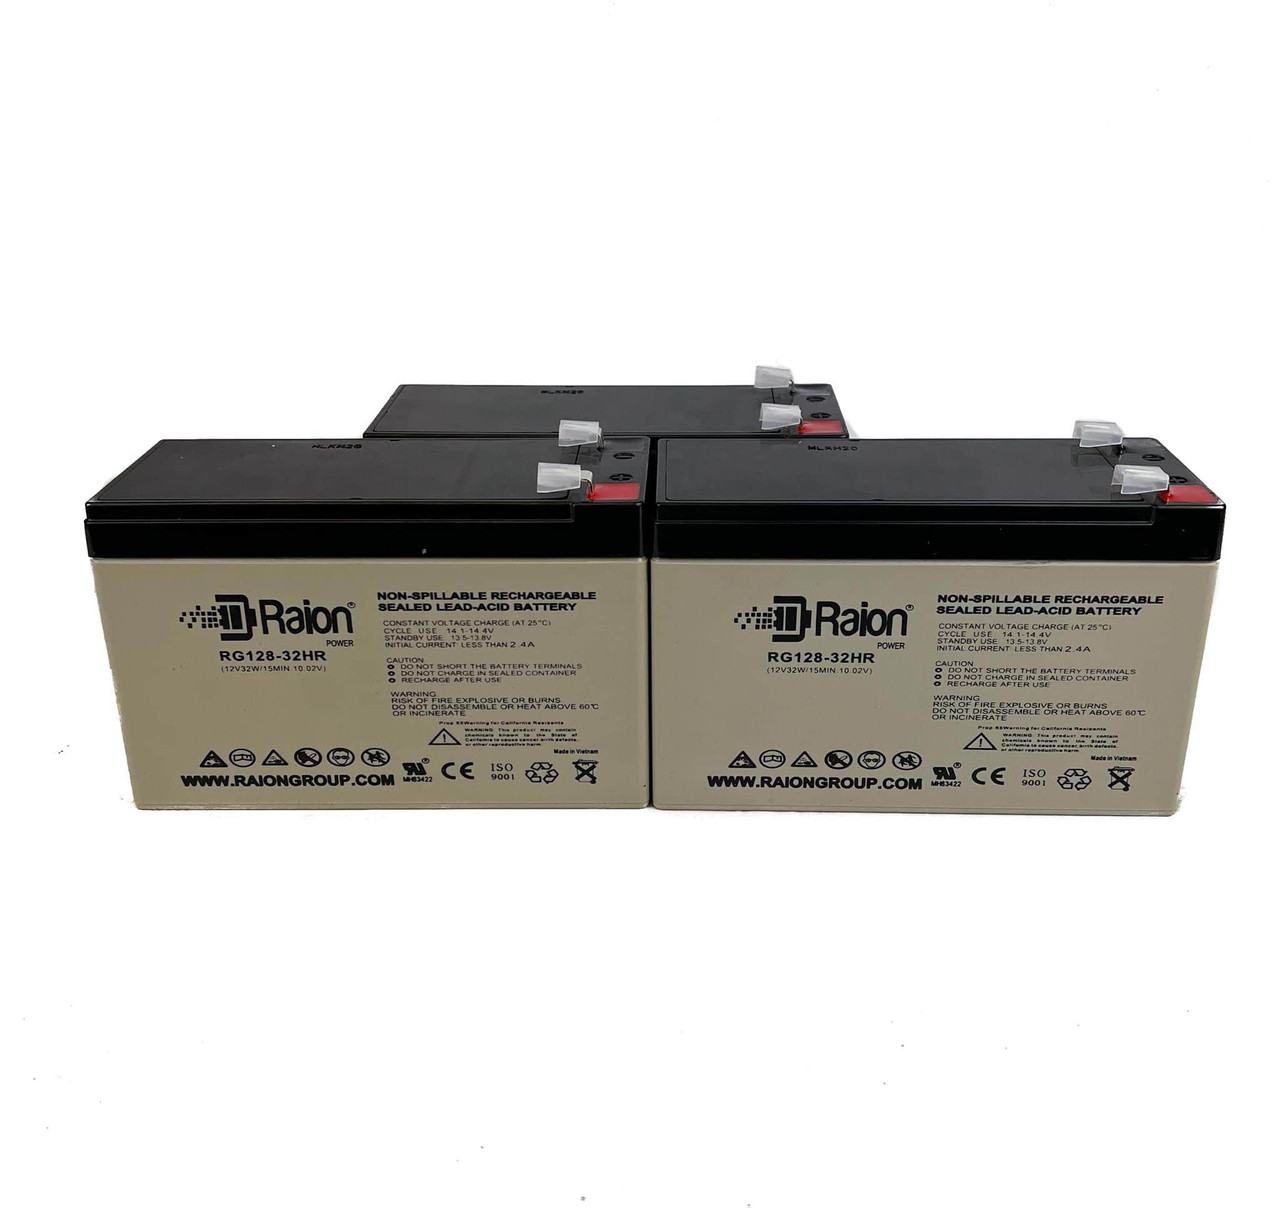 Raion Power 12V 7.5Ah High Rate Discharge UPS Batteries for Powerware PW9120-1000 - 3 Pack